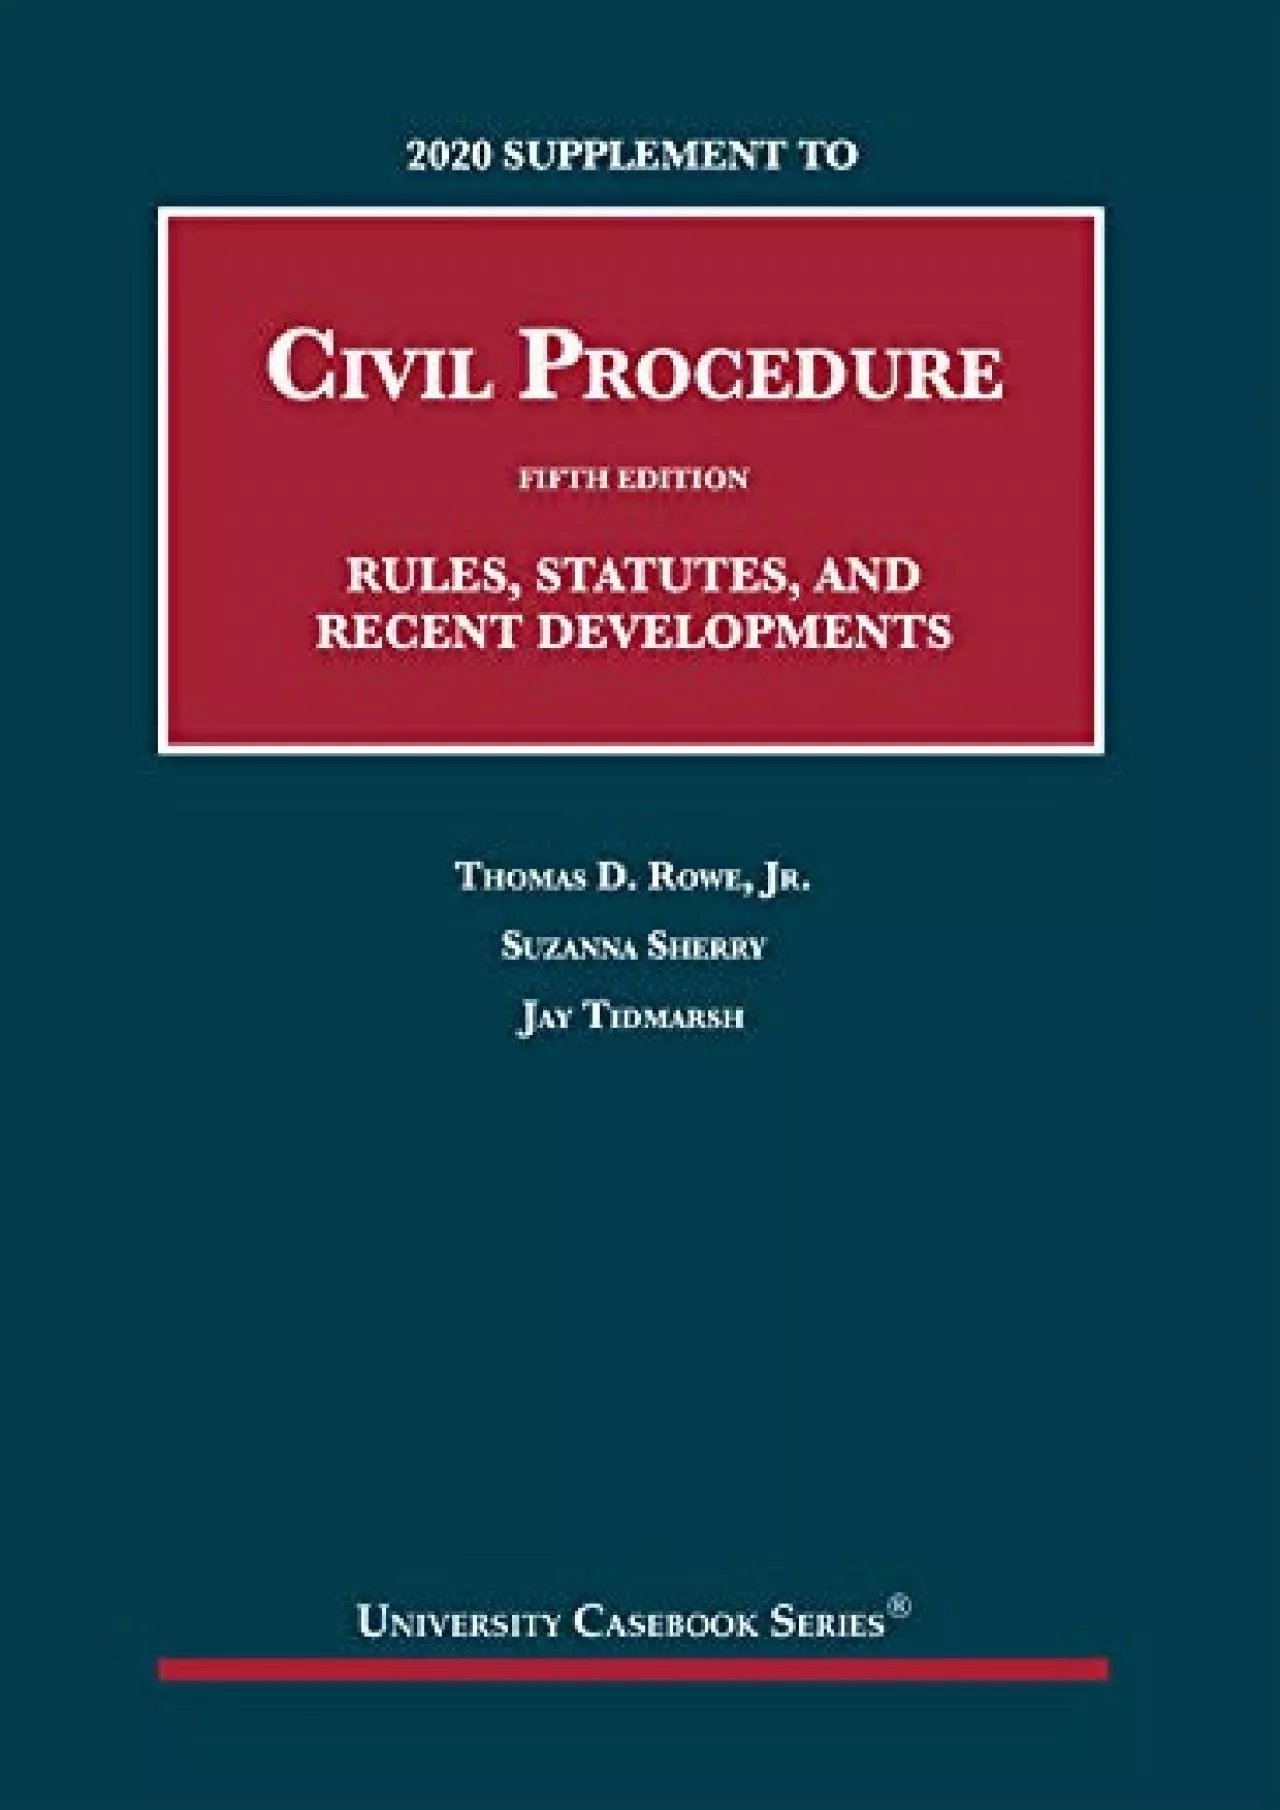 [PDF READ ONLINE] 2020 Supplement to Civil Procedure, 5th, Rules, Statutes, and Recent